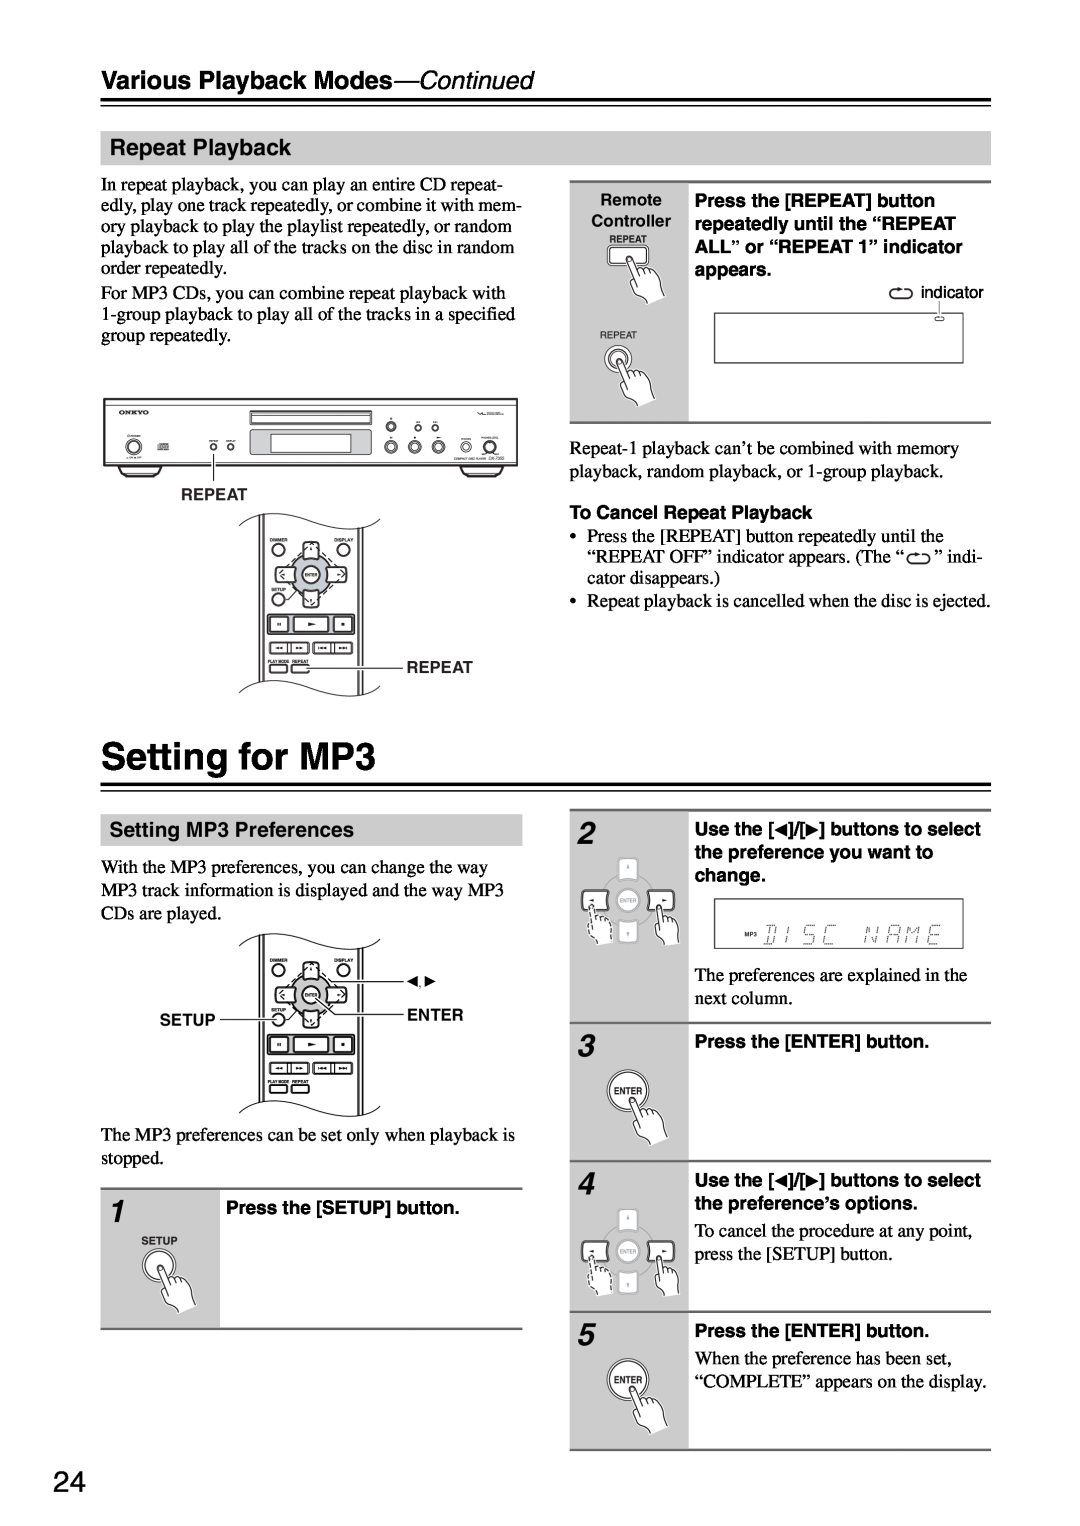 Onkyo DX-7355 instruction manual Setting for MP3, Repeat Playback, Various Playback Modes-Continued 